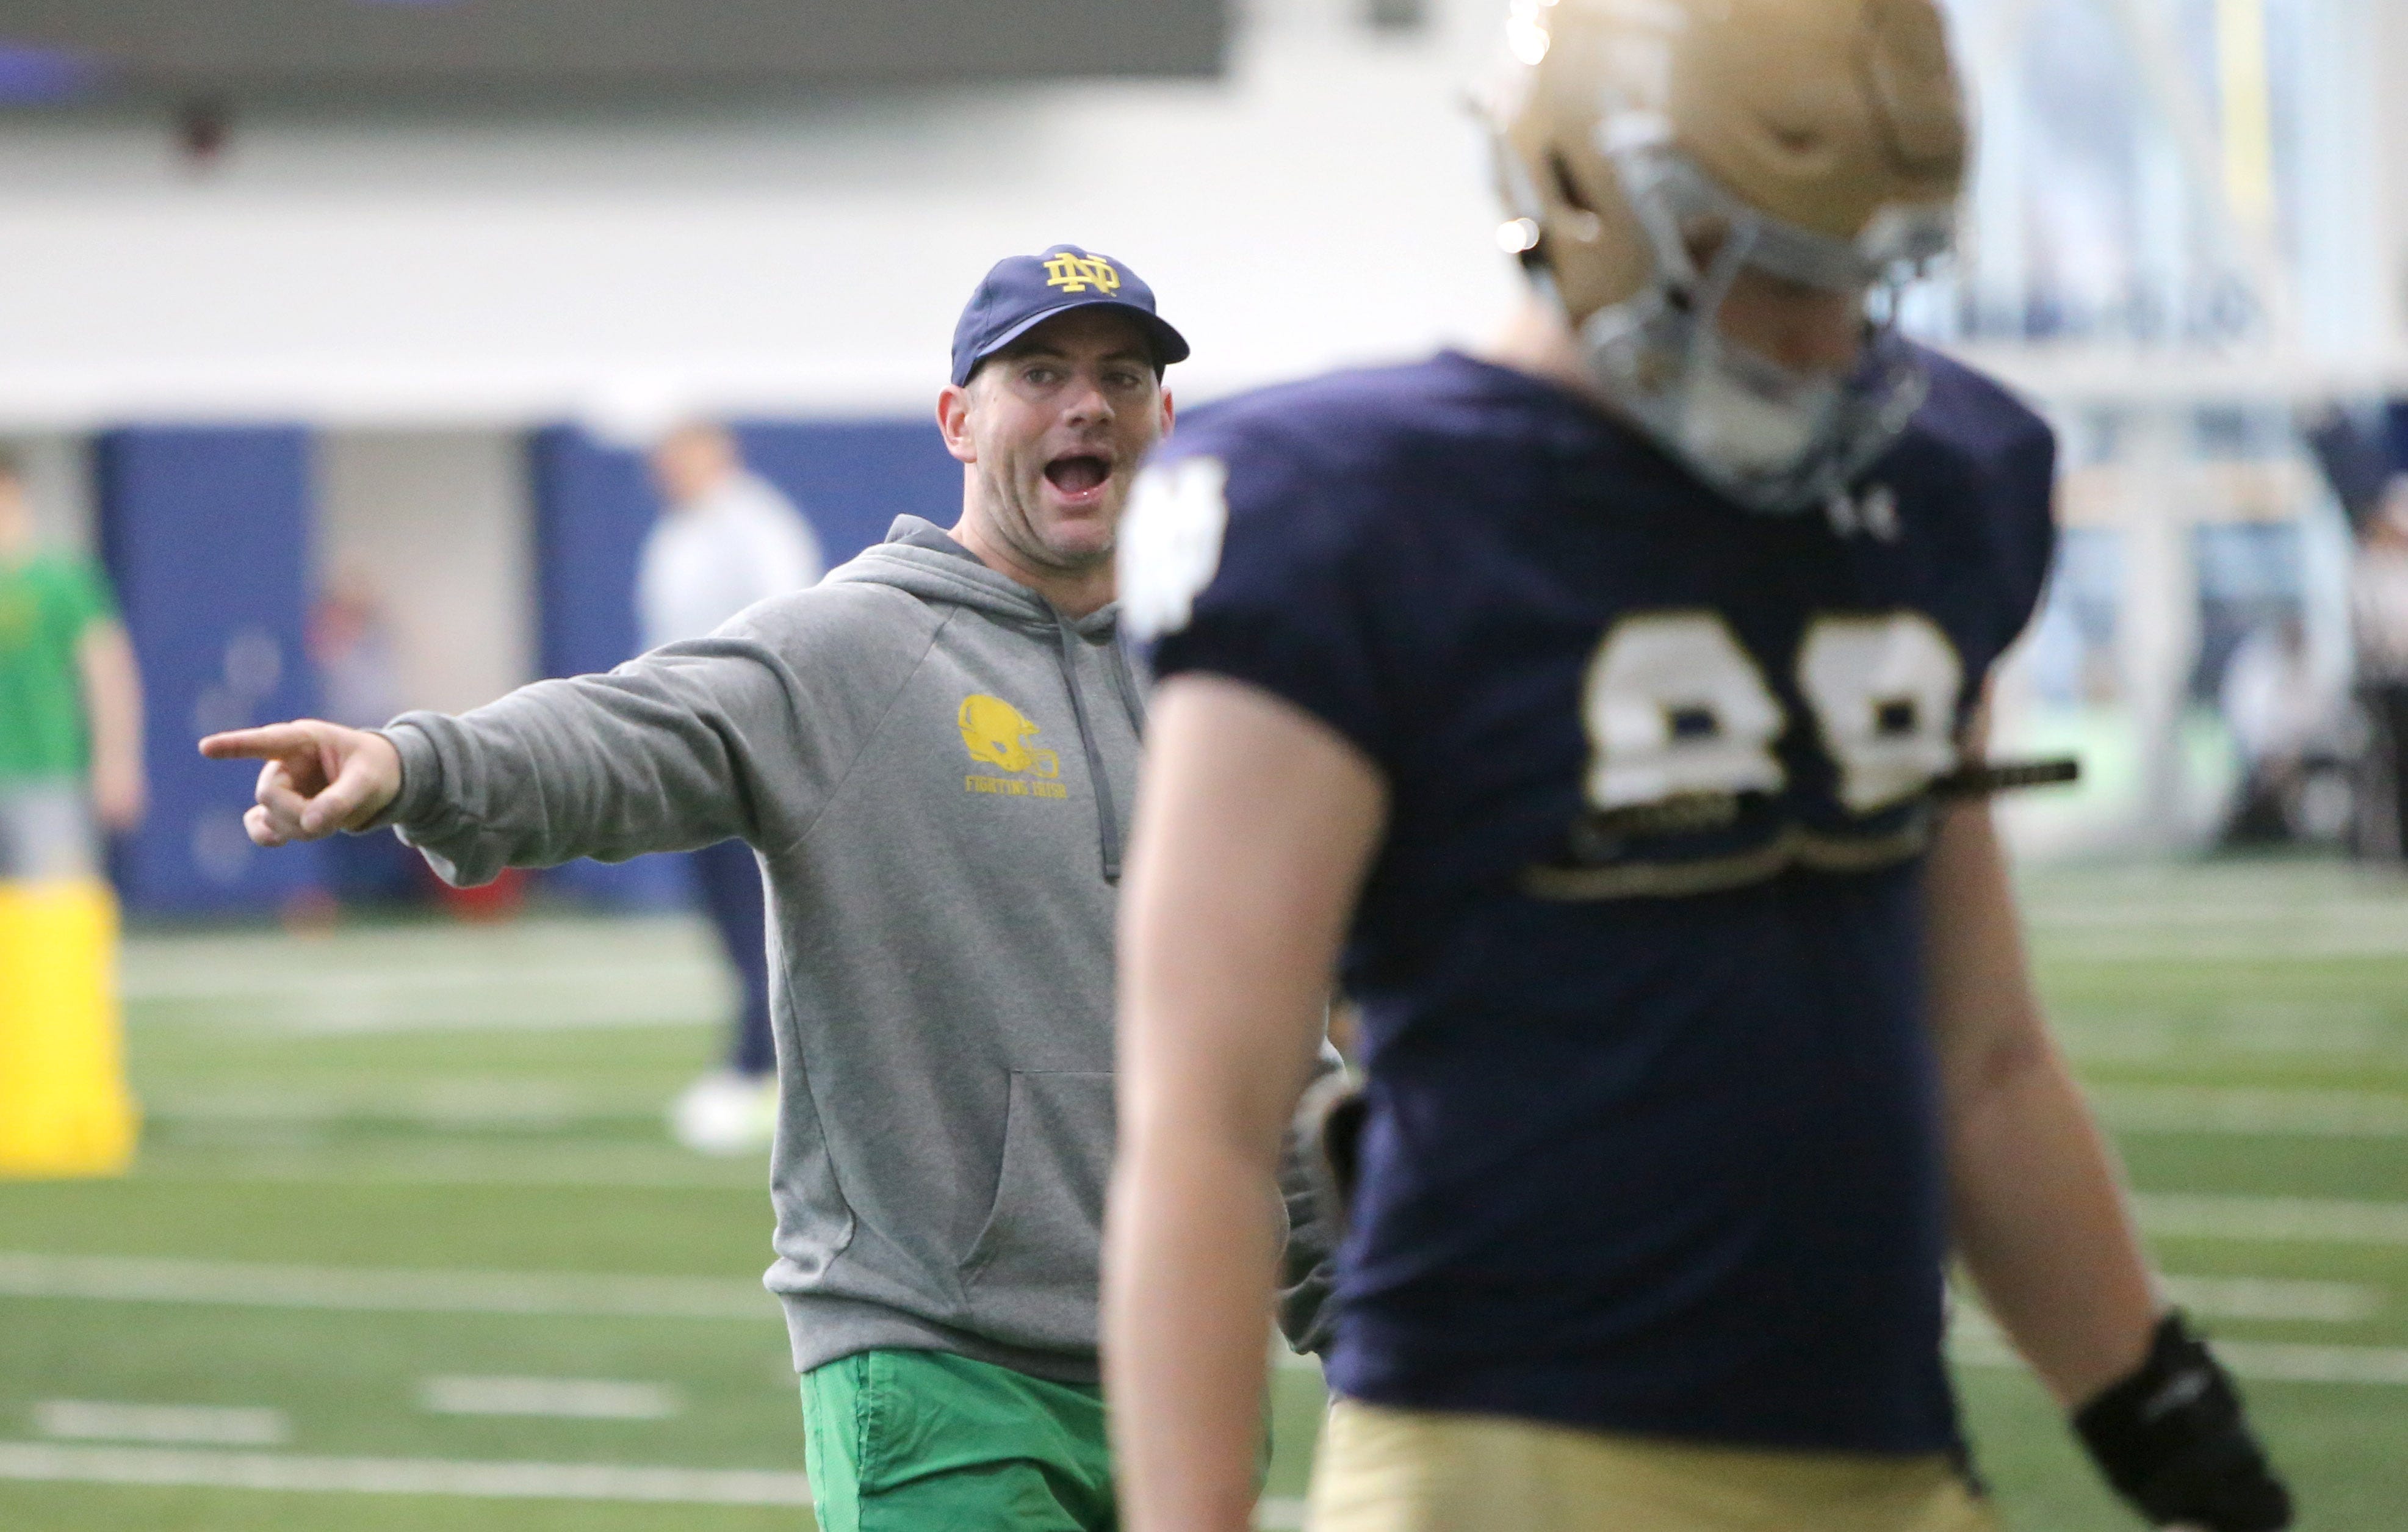 Notre Dame offensive coordinator/tight ends coach Gerad Parker calls out instructions as tight end Mitchell Evans (88) goes through drills Saturday, March 25, 2023, at Notre Dame spring football practice in South Bend.

Nd Fb Practice 03252023